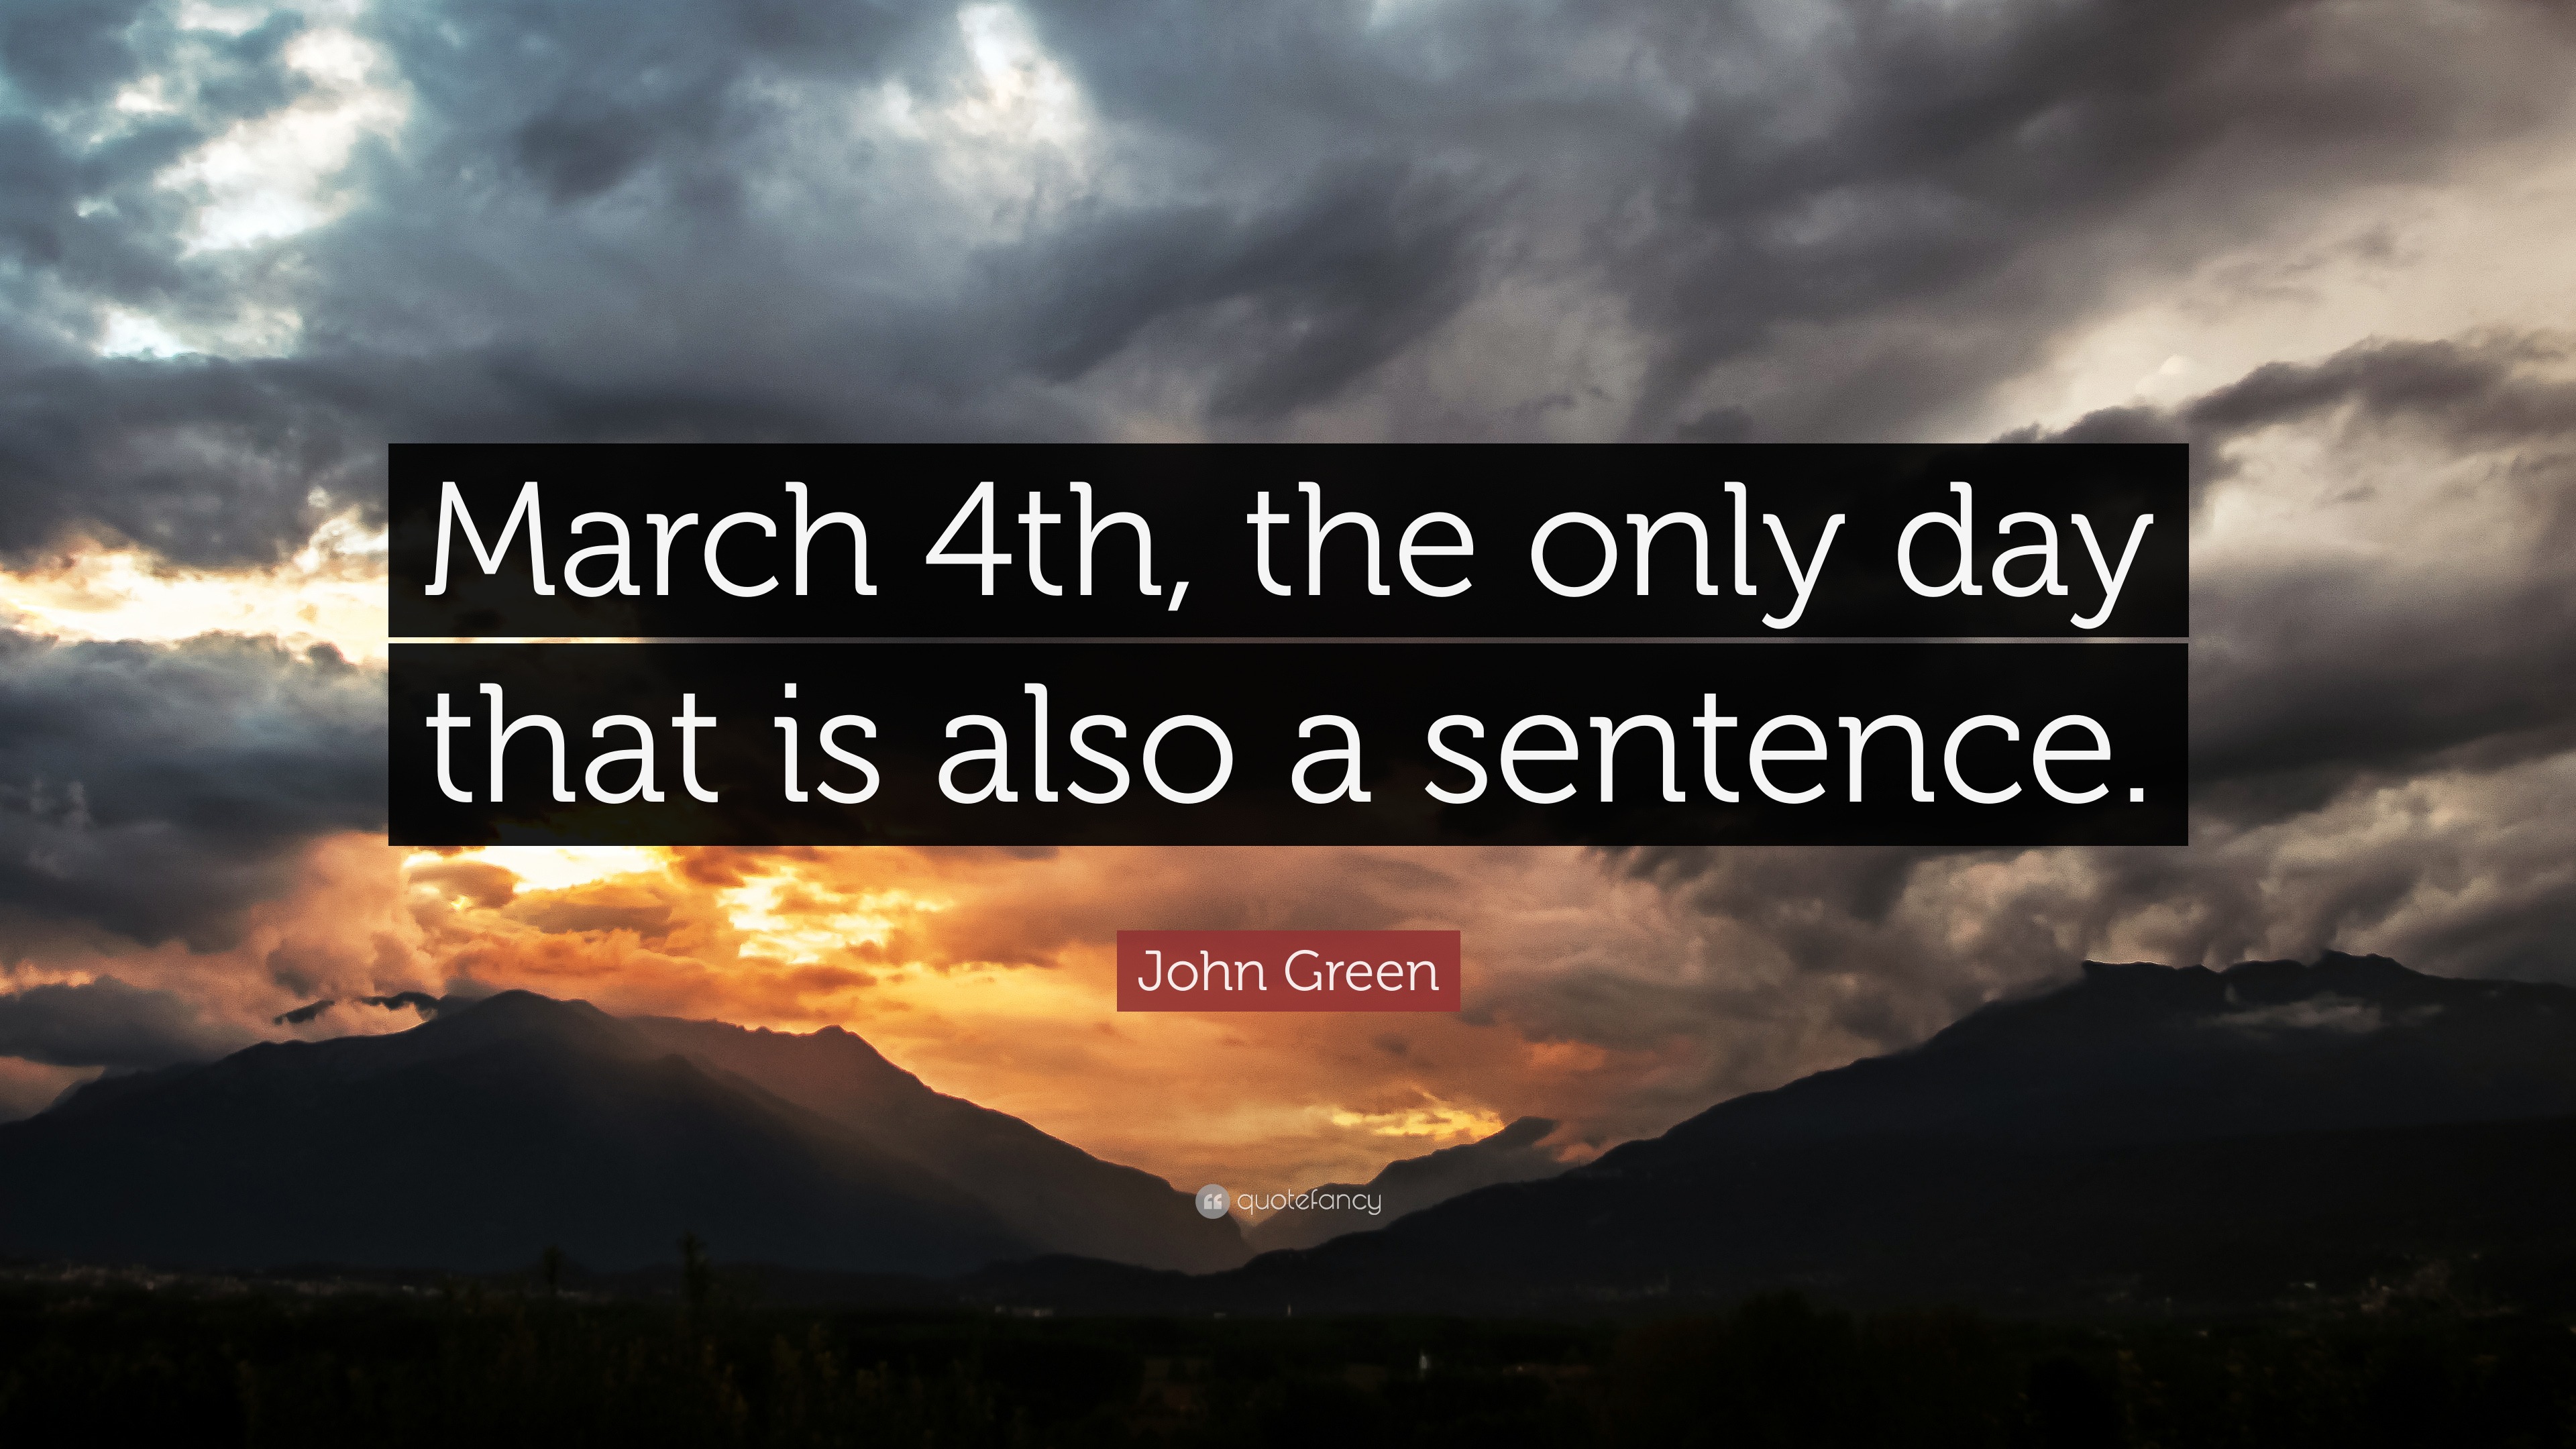 John Green Quote: “March 4th, the only day that is also a sentence ...